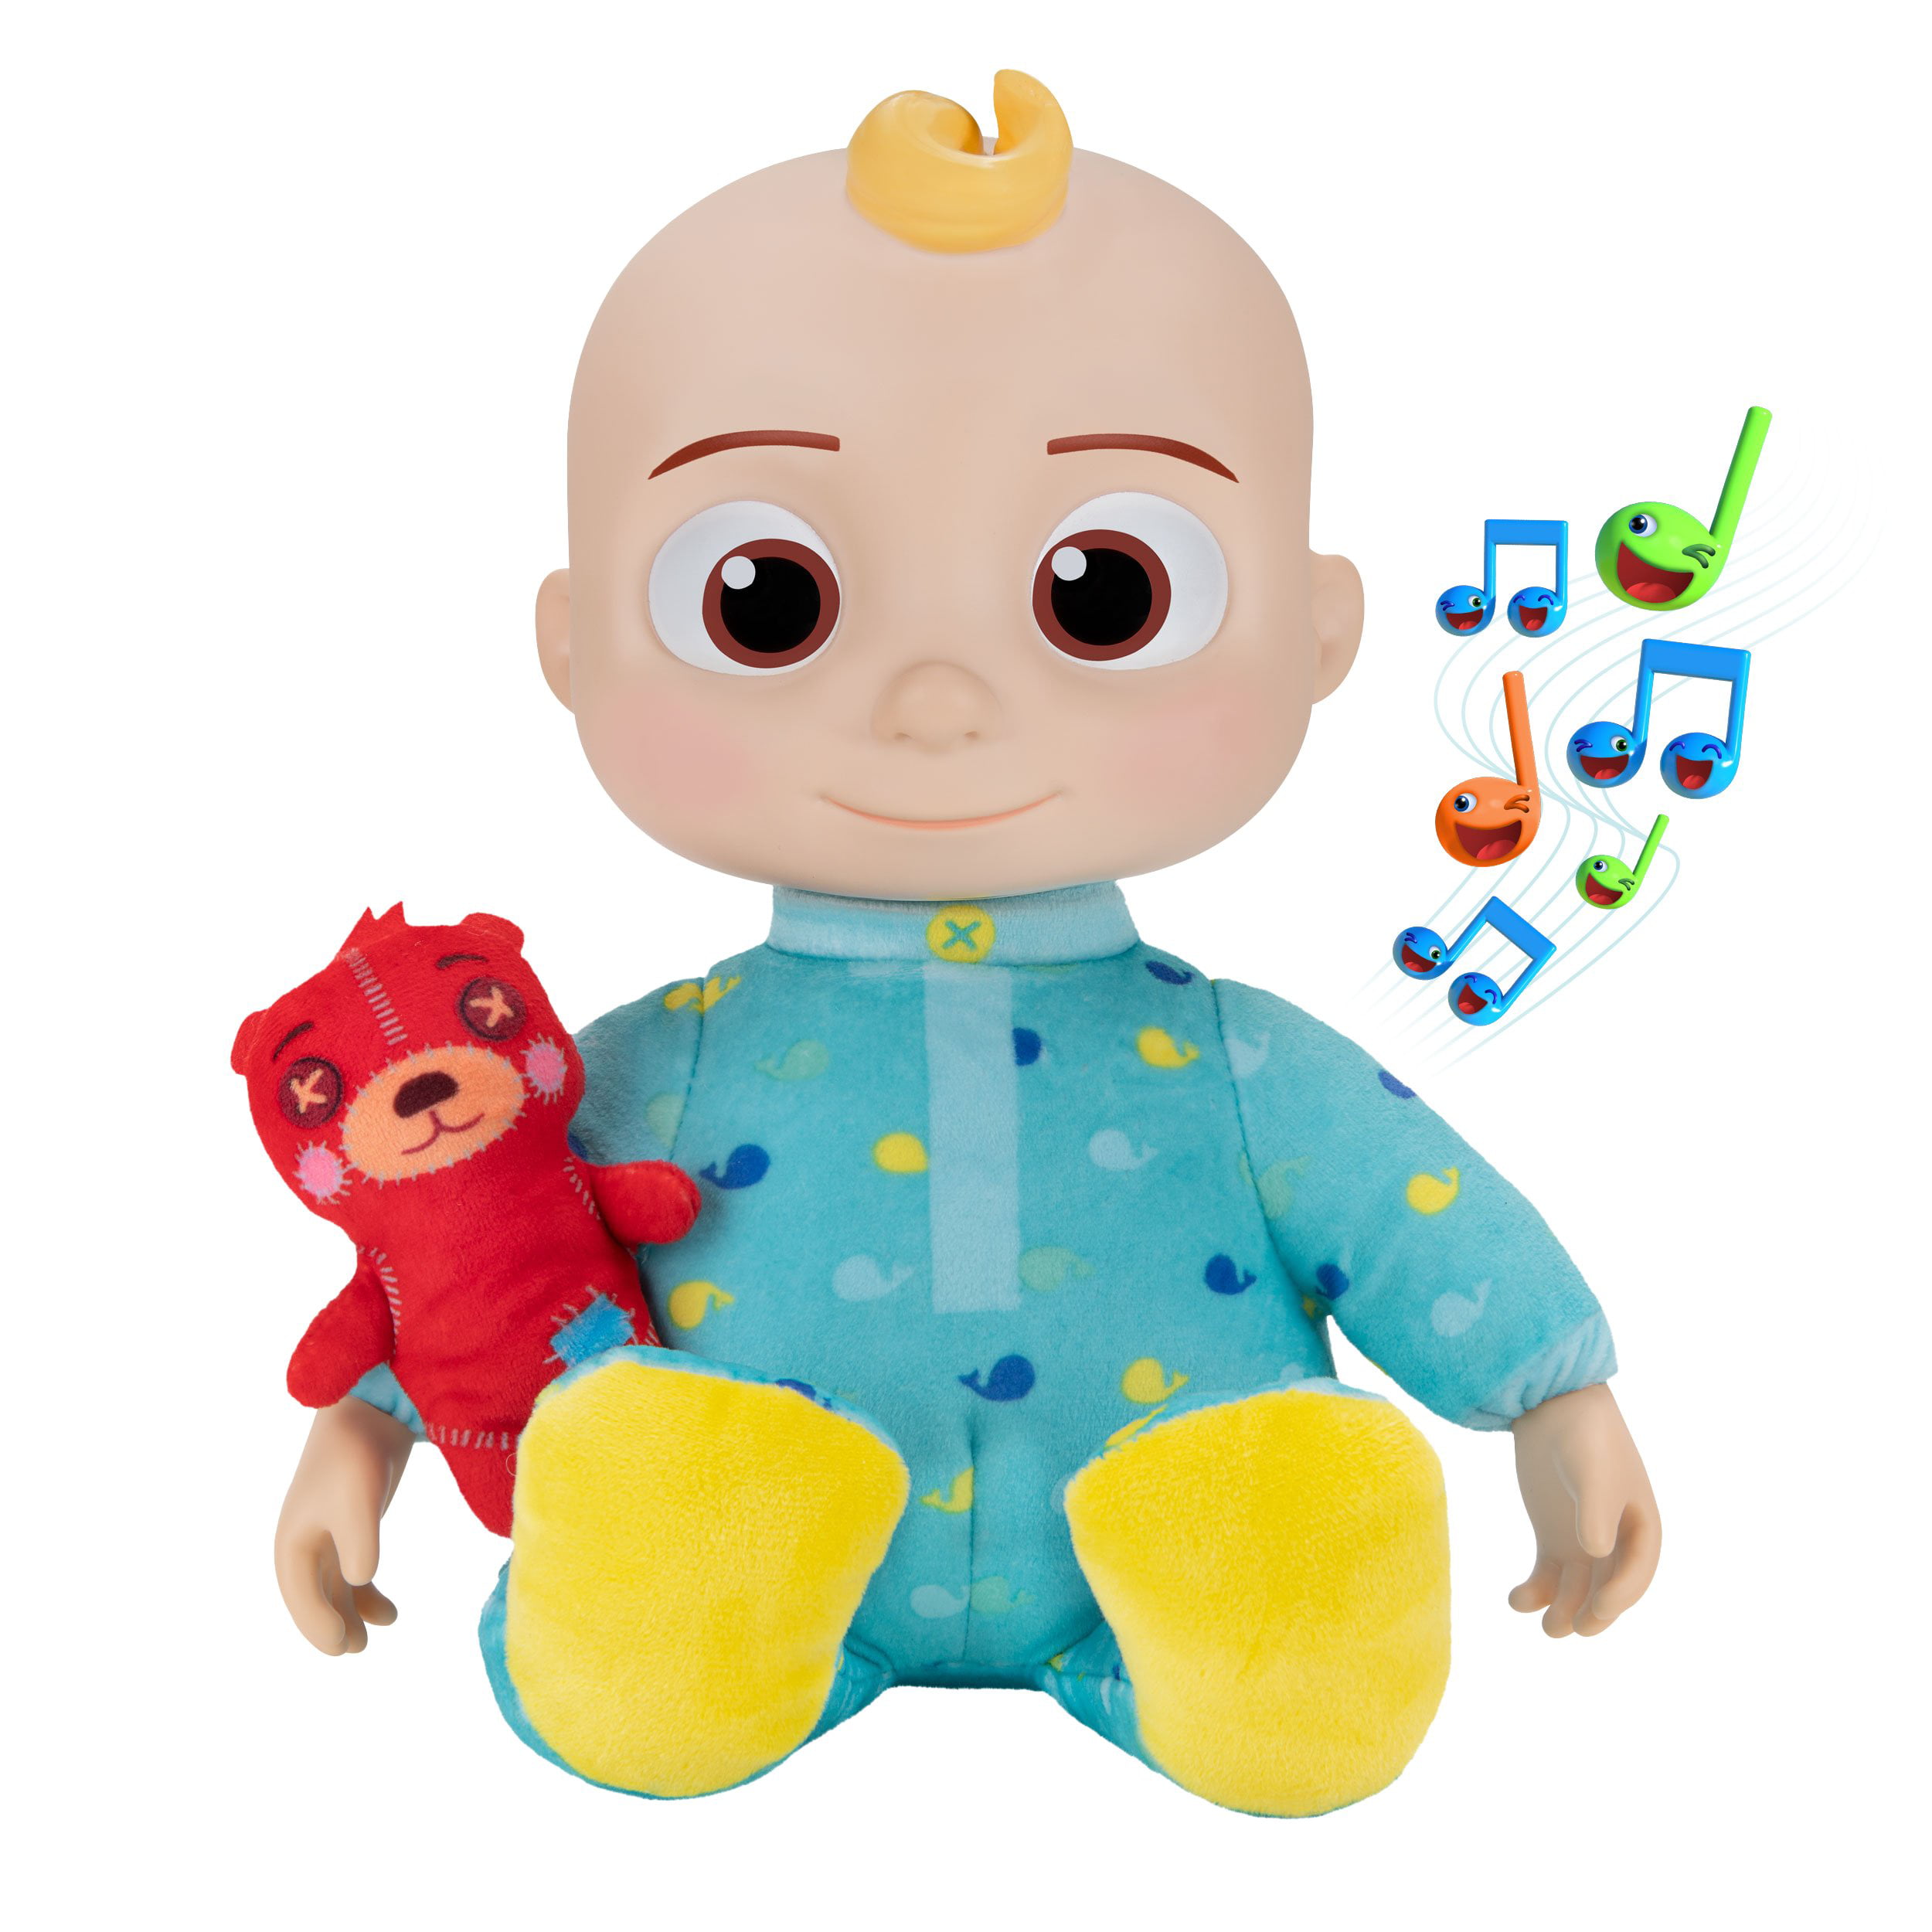 Details about   Cocomelon JJ Plush Toy 25cm/10in Boy Stuffed Doll Educational Kids Birthday Gift 